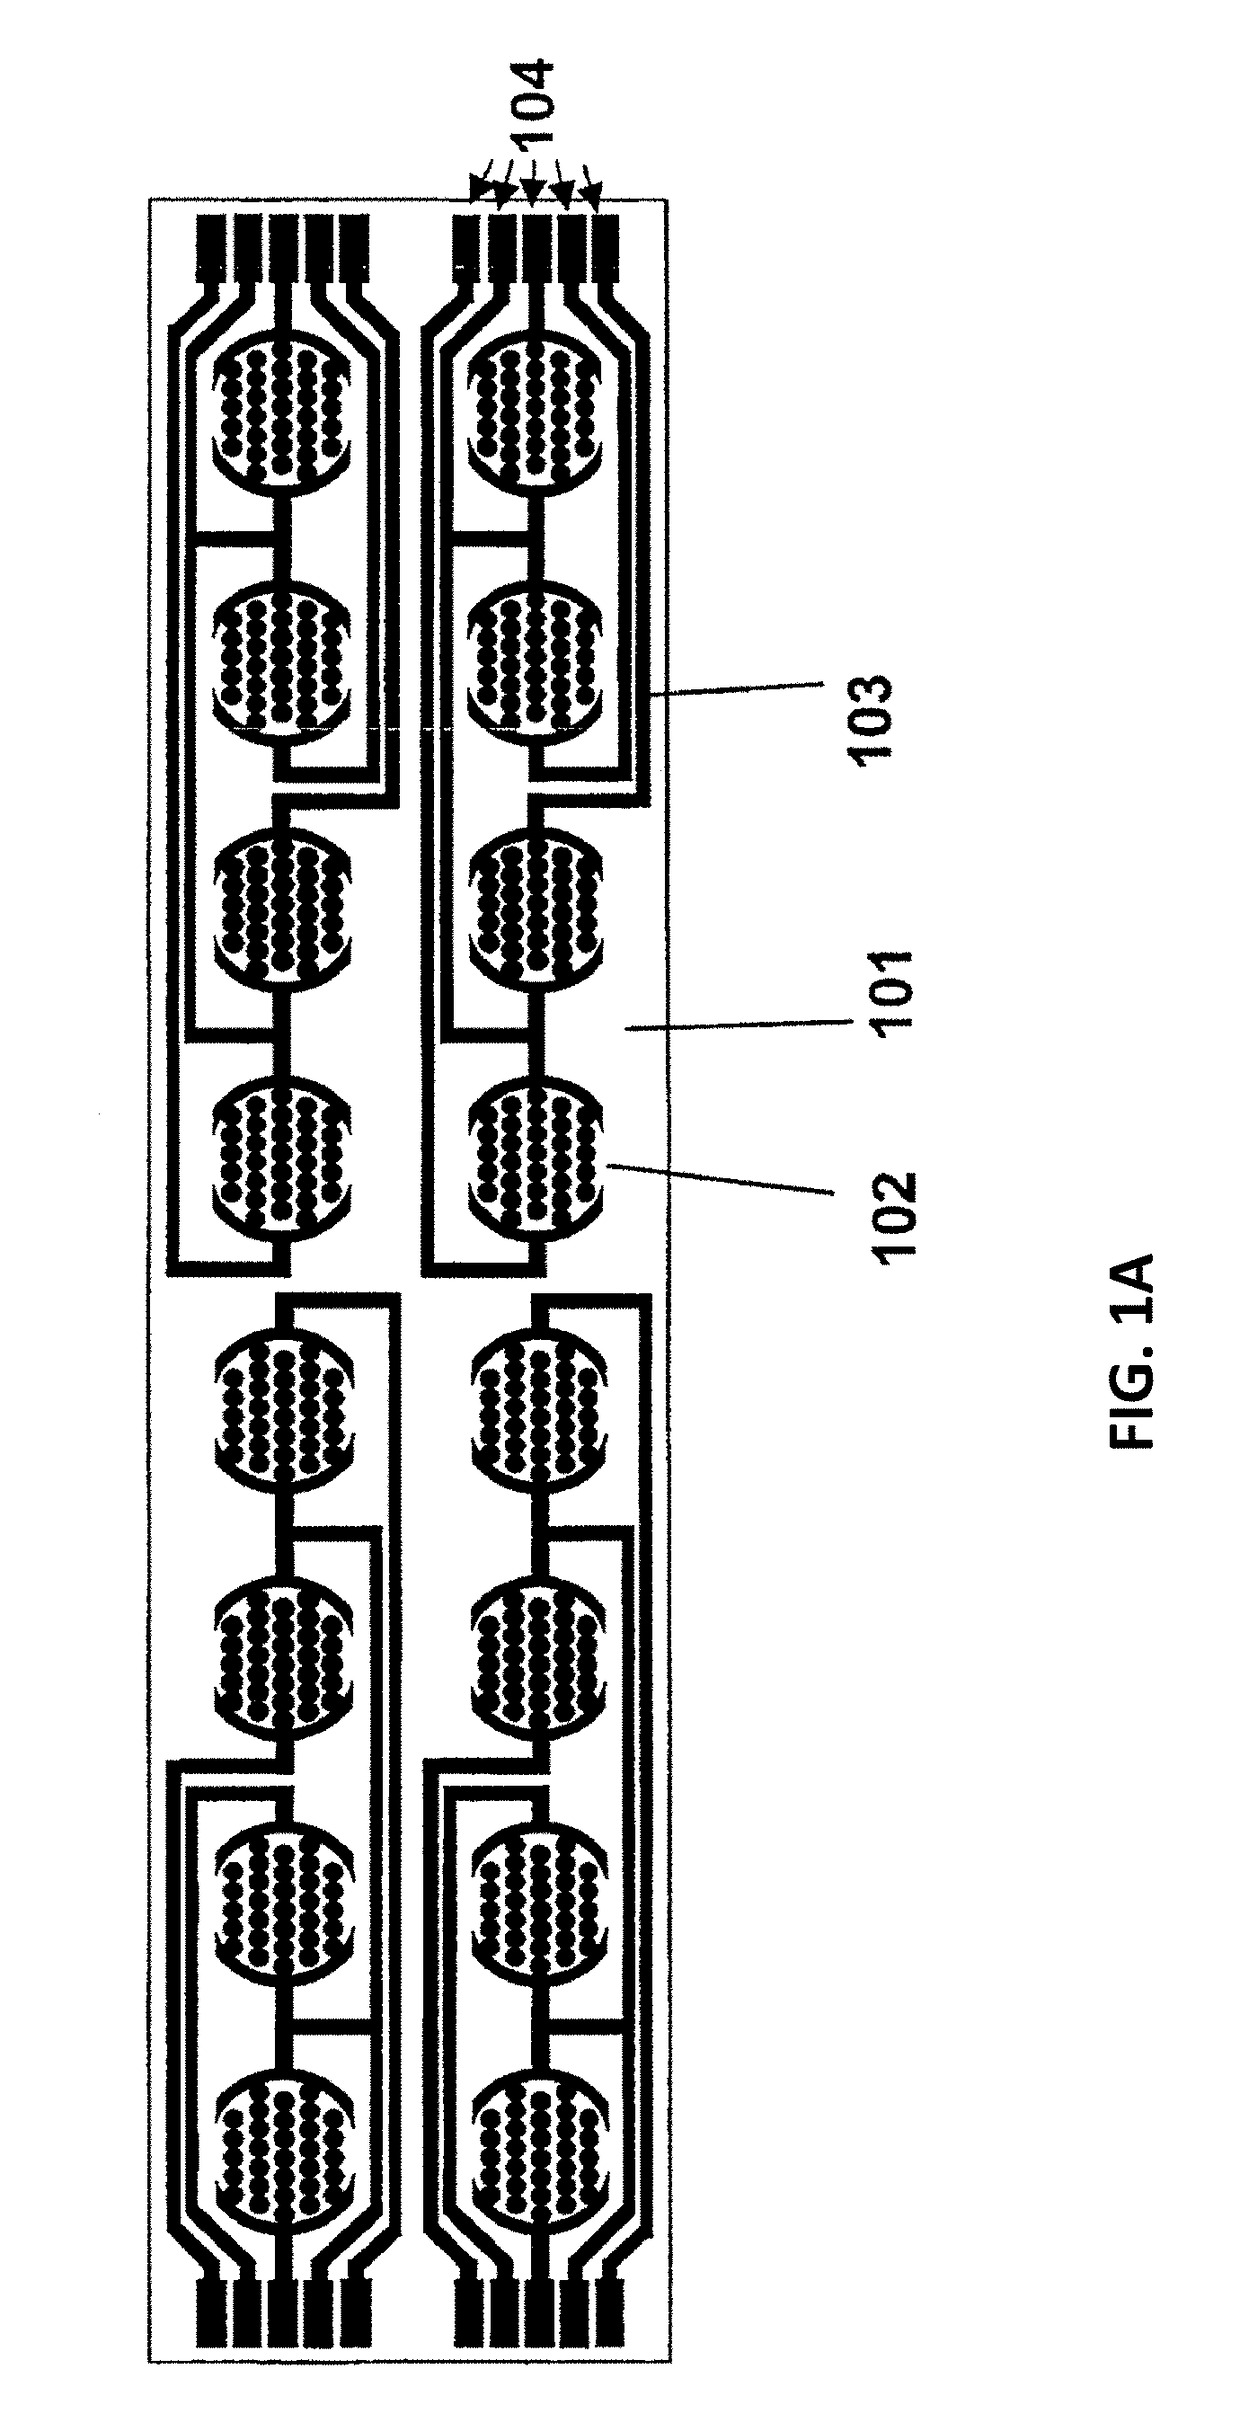 Cell-substrate impedance monitoring of cancer cells